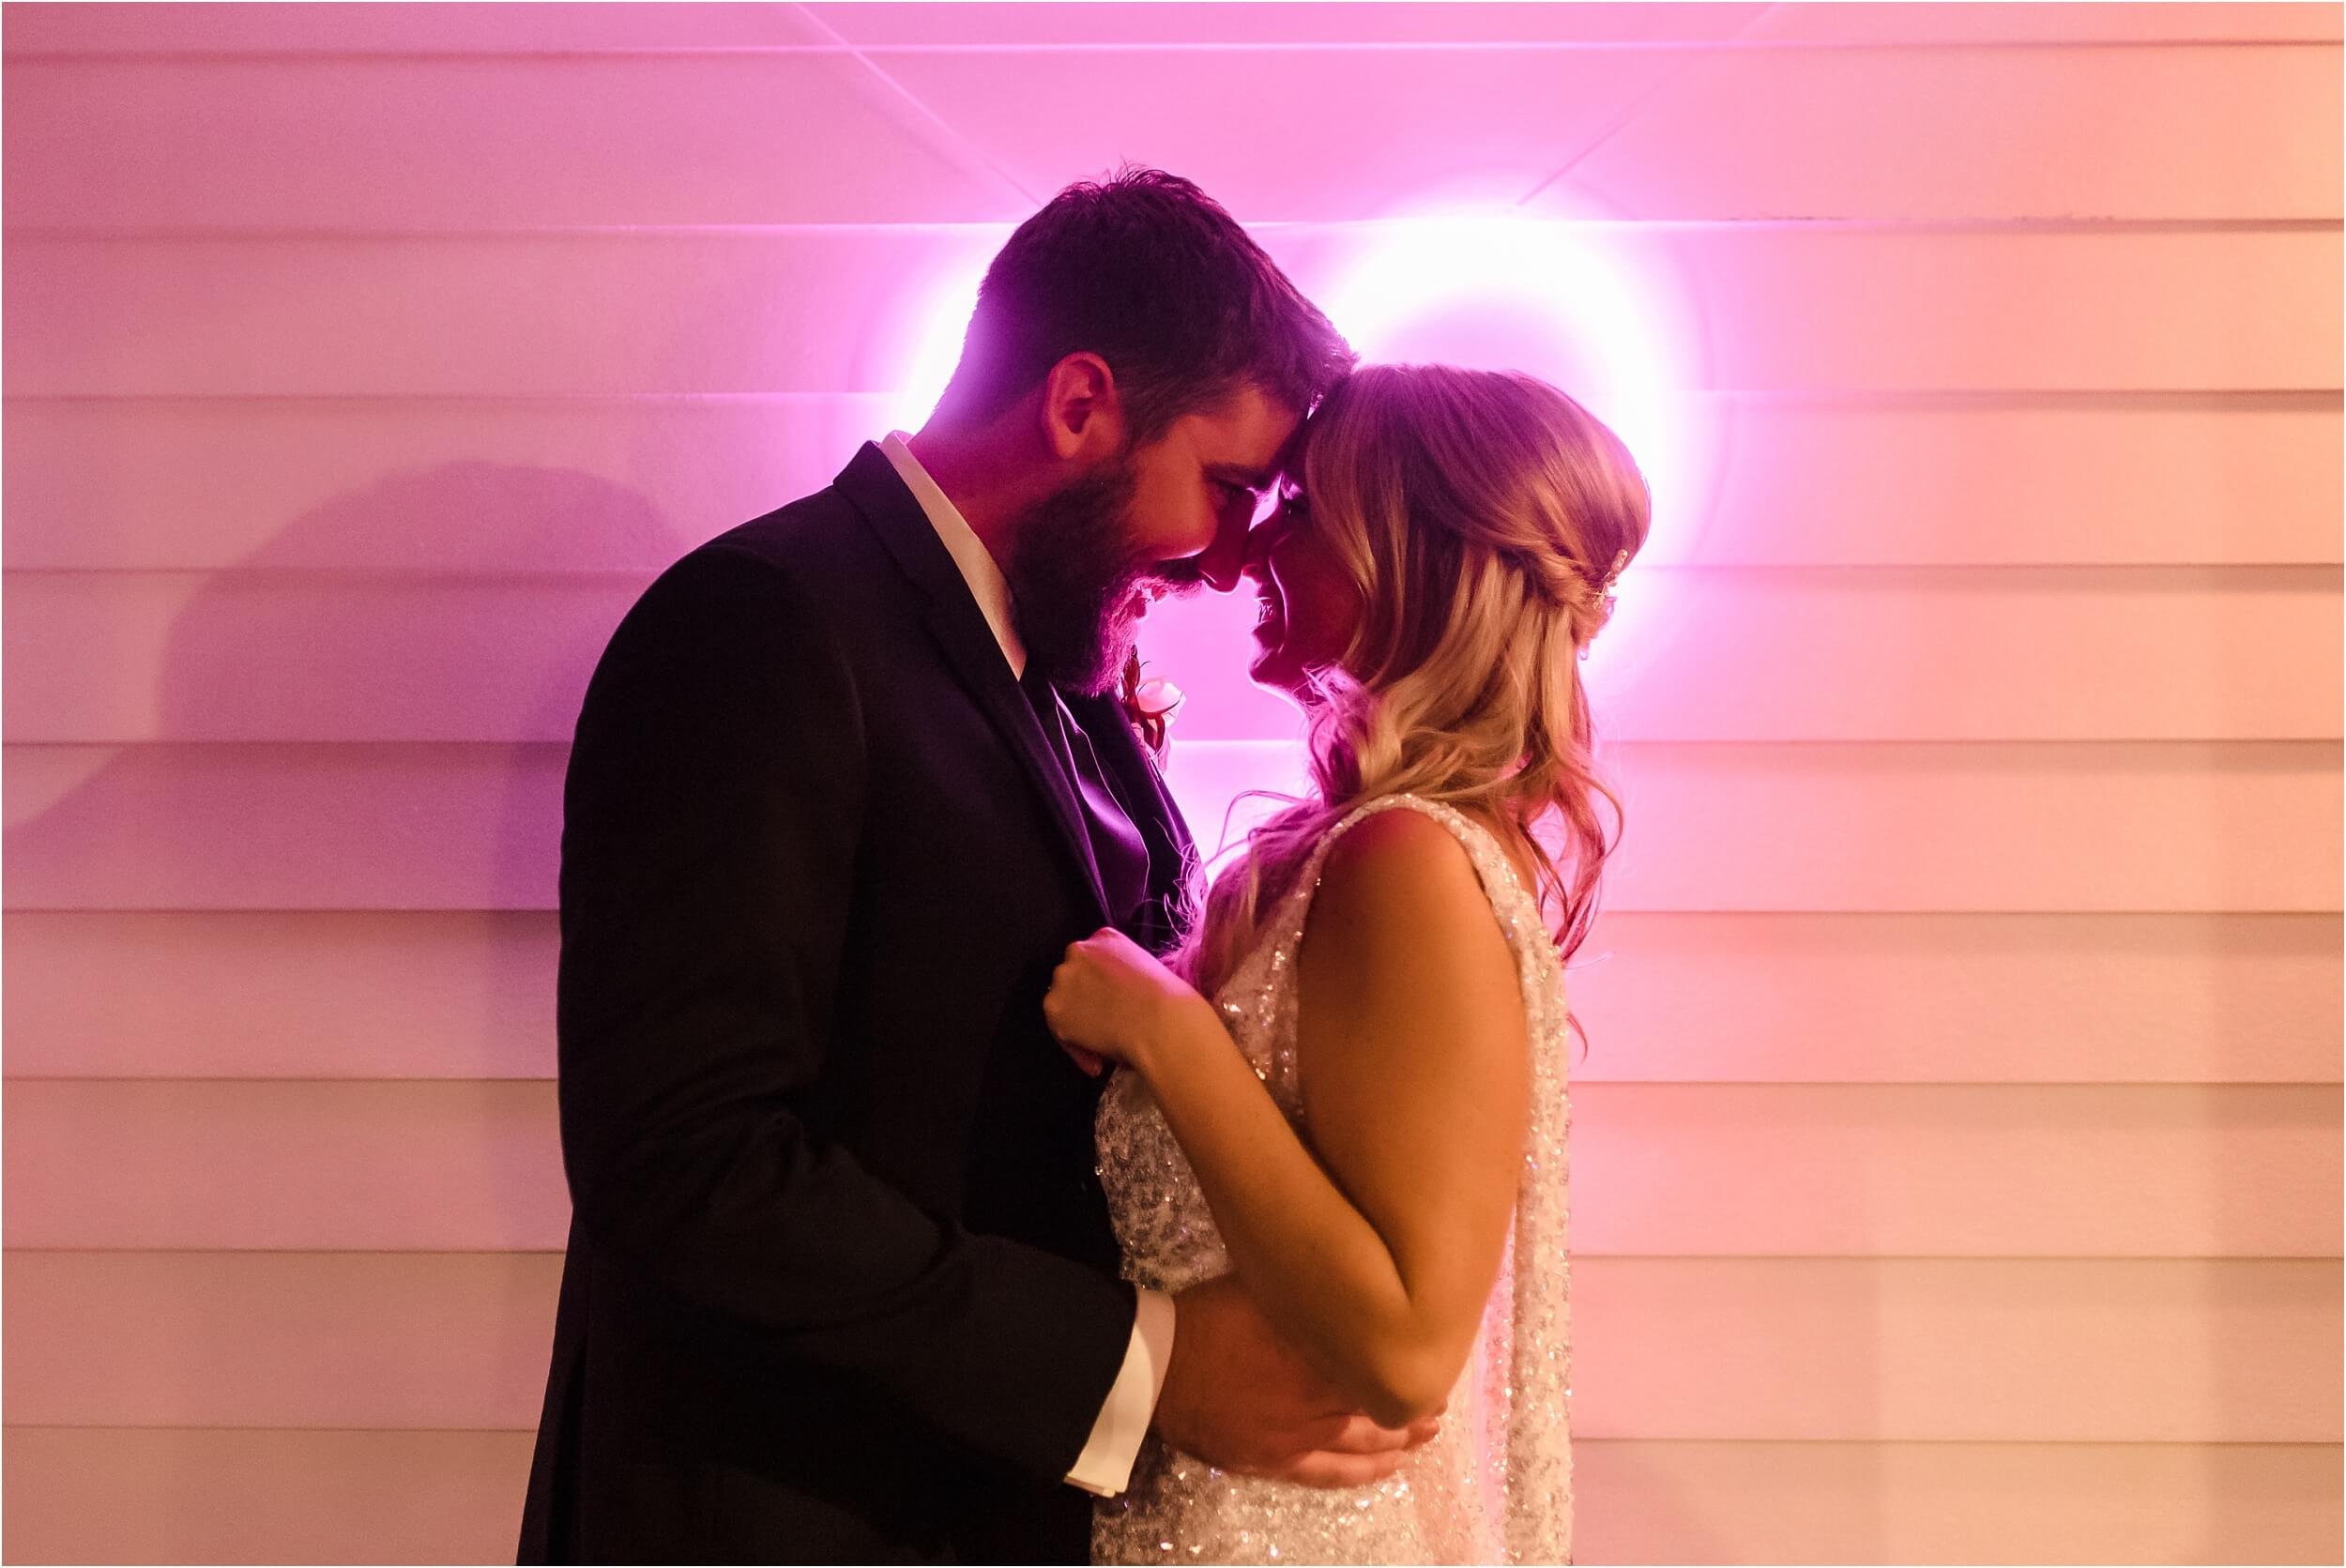  A couple embraces in front of a heart neon sign at their wedding reception.  